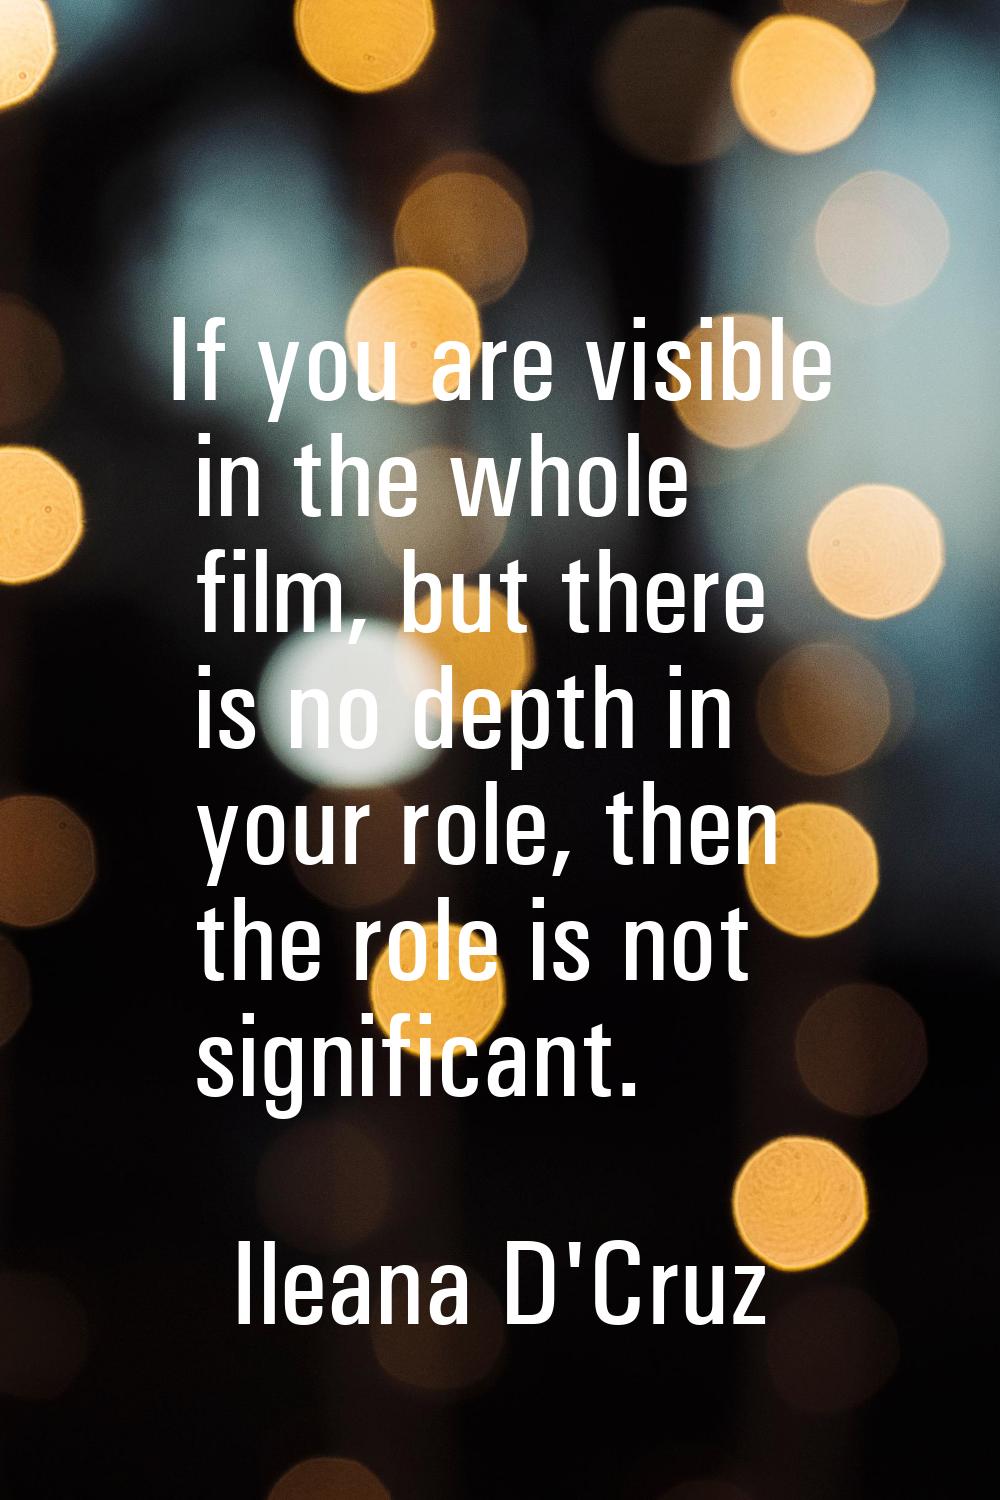 If you are visible in the whole film, but there is no depth in your role, then the role is not sign